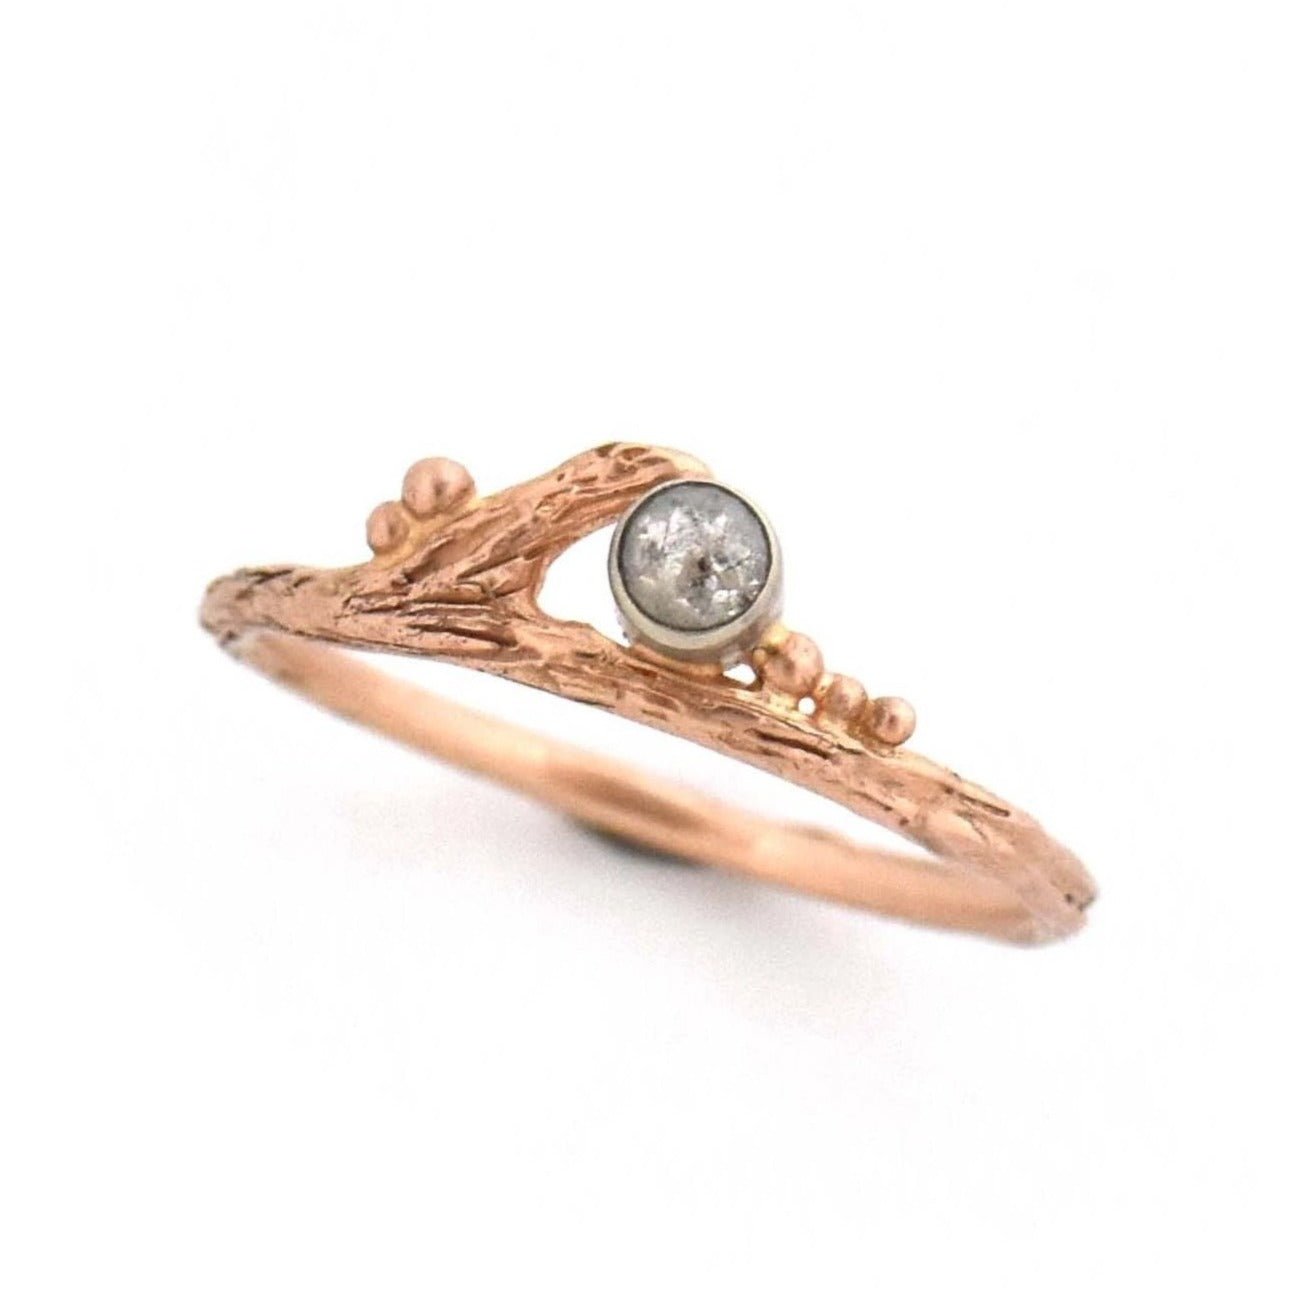 Gold Enchanted Rustic Diamond Twig Ring - your choice of gold - Wedding Ring 18K Palladium White Gold / Rustic Diamond 14K Rose Gold / Rustic Diamond 3447 - handmade by Beth Millner Jewelry